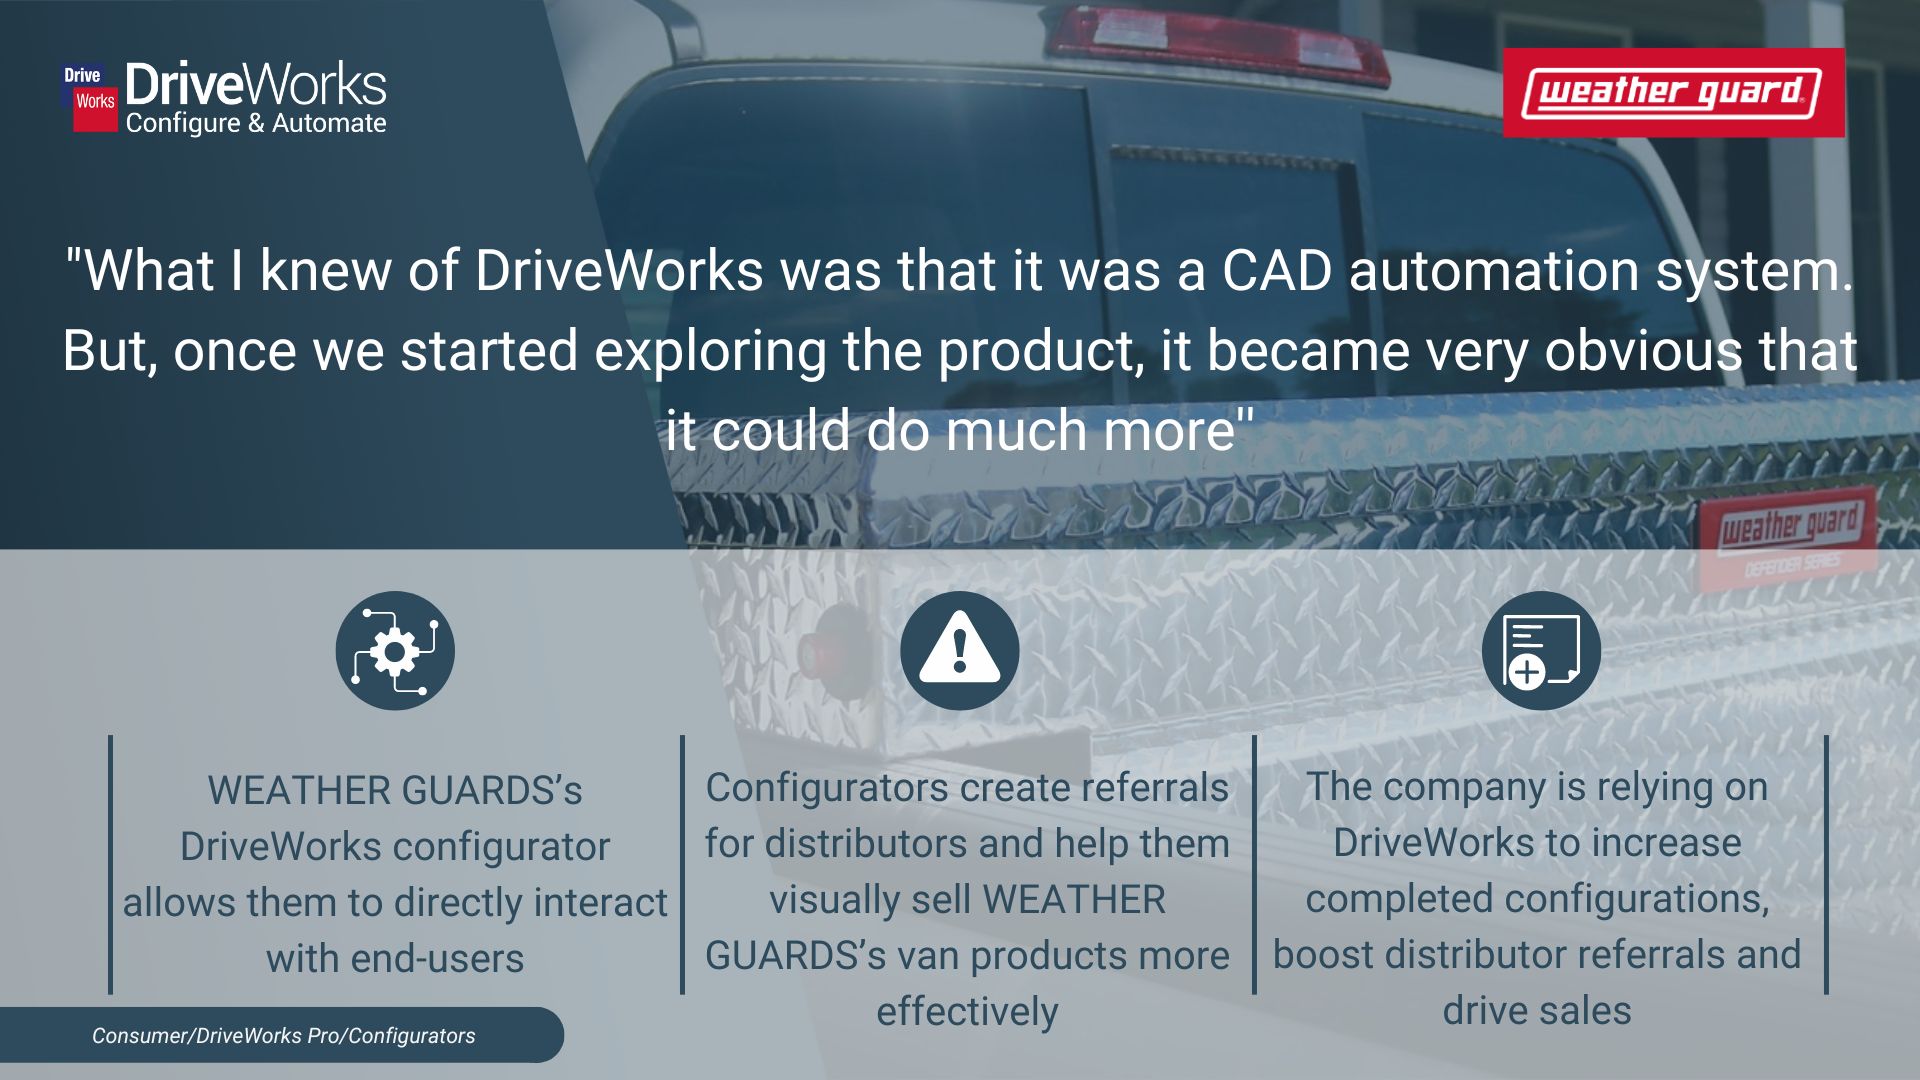 A graphic explaning some of the benefits DriveWors customer, WEATHER GUARD is experiencing: "What I knew of DriveWorks was that it was a CAD automation system. But, once we started exploring the product, it became very obvious that it could do much more'', WEATHER GUARDS’s DriveWorks configurator allows them to directly interact with end-users, Configurators create referrals for distributors and help them visually sell WEATHER GUARDS’s van products more effectively, The company is relying on DriveWorks to increase completed configurations, boost distributor referrals and drive sales.